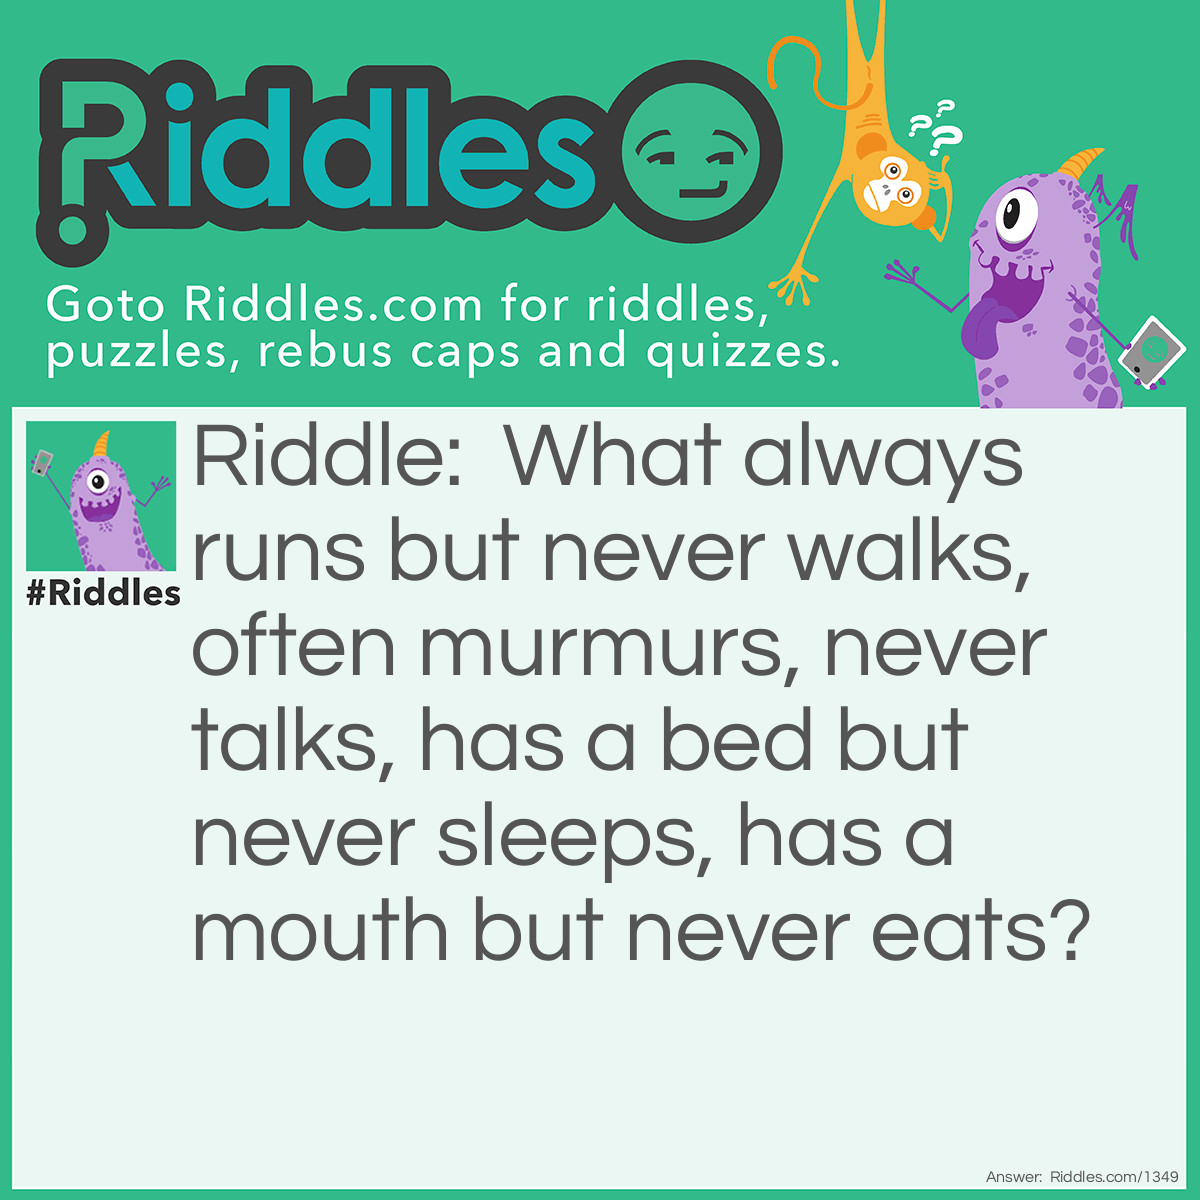 Riddle: What always runs but never walks, often murmurs, never talks, has a bed but never sleeps, has a mouth but never eats? Answer: A river.